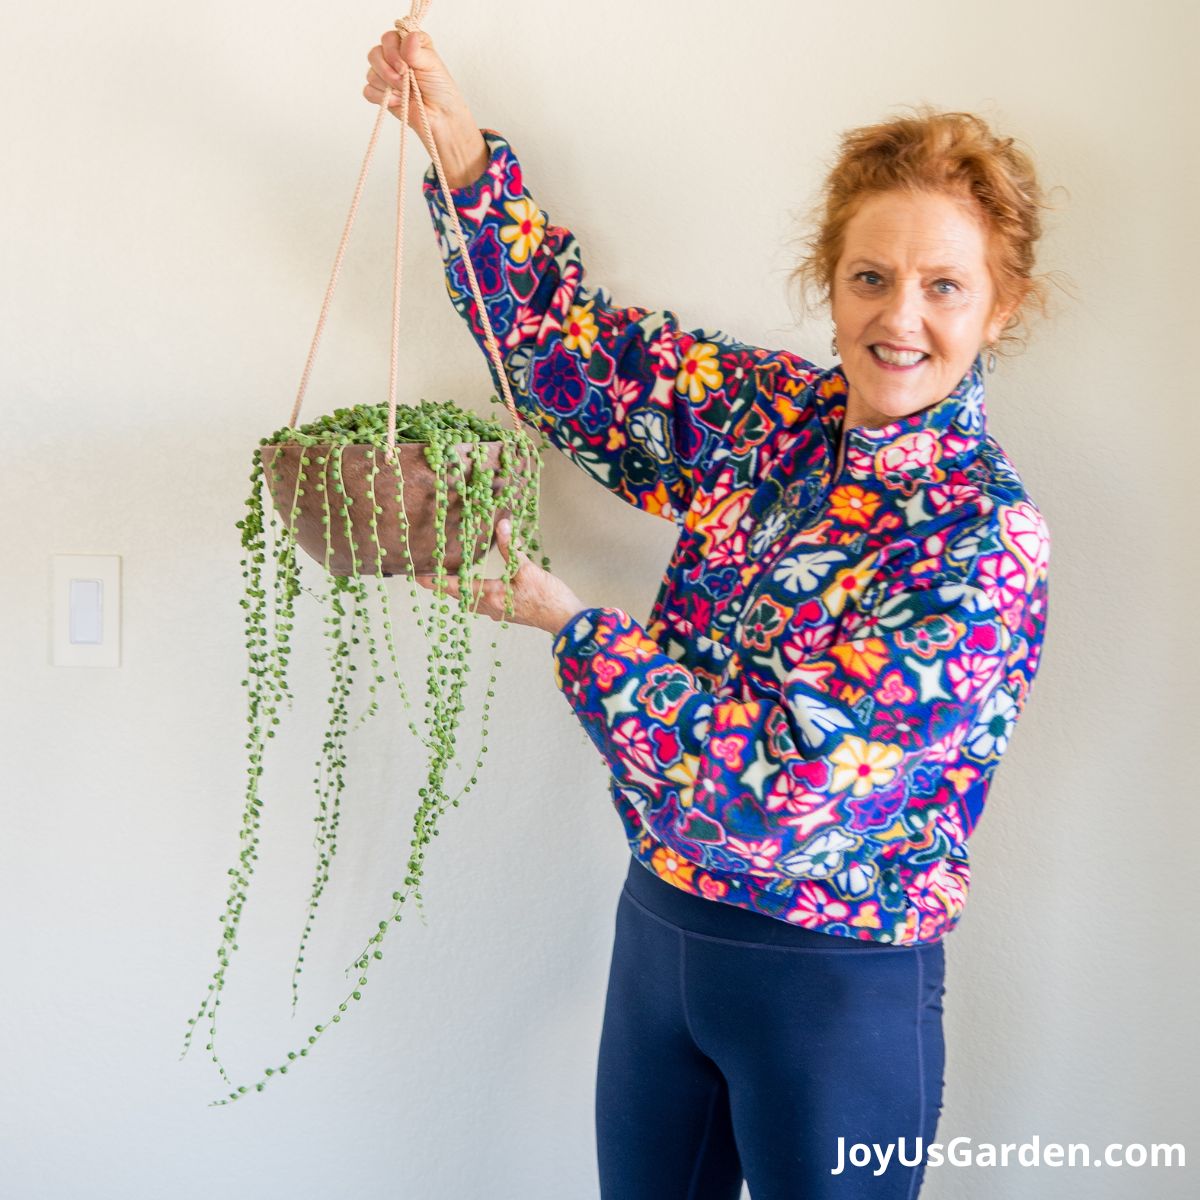 nell foster incolorful floral sweater standing indoors holding a string of pearls plant 